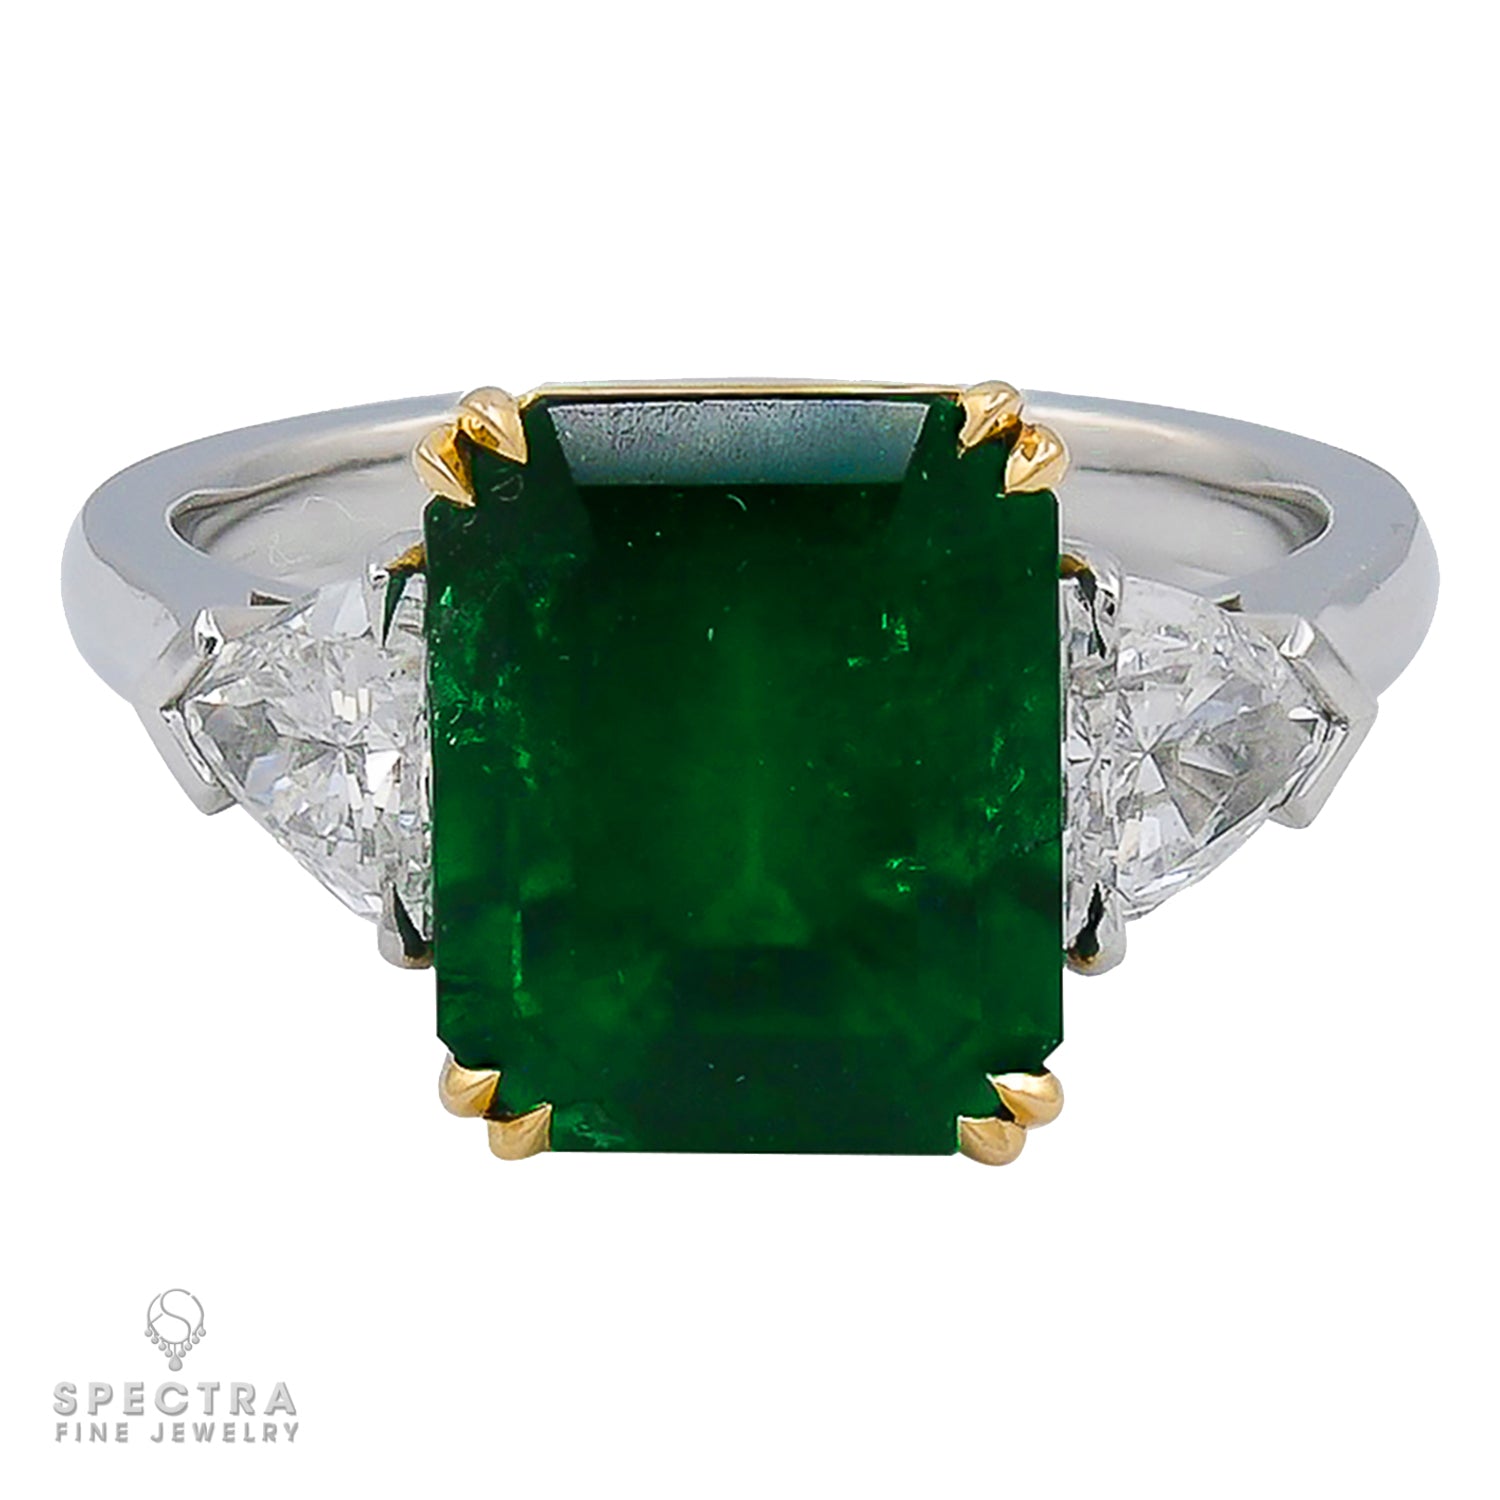 Spectra Fine Jewelry 4.09 ct. Colombian Emerald Diamond Engagement Ring